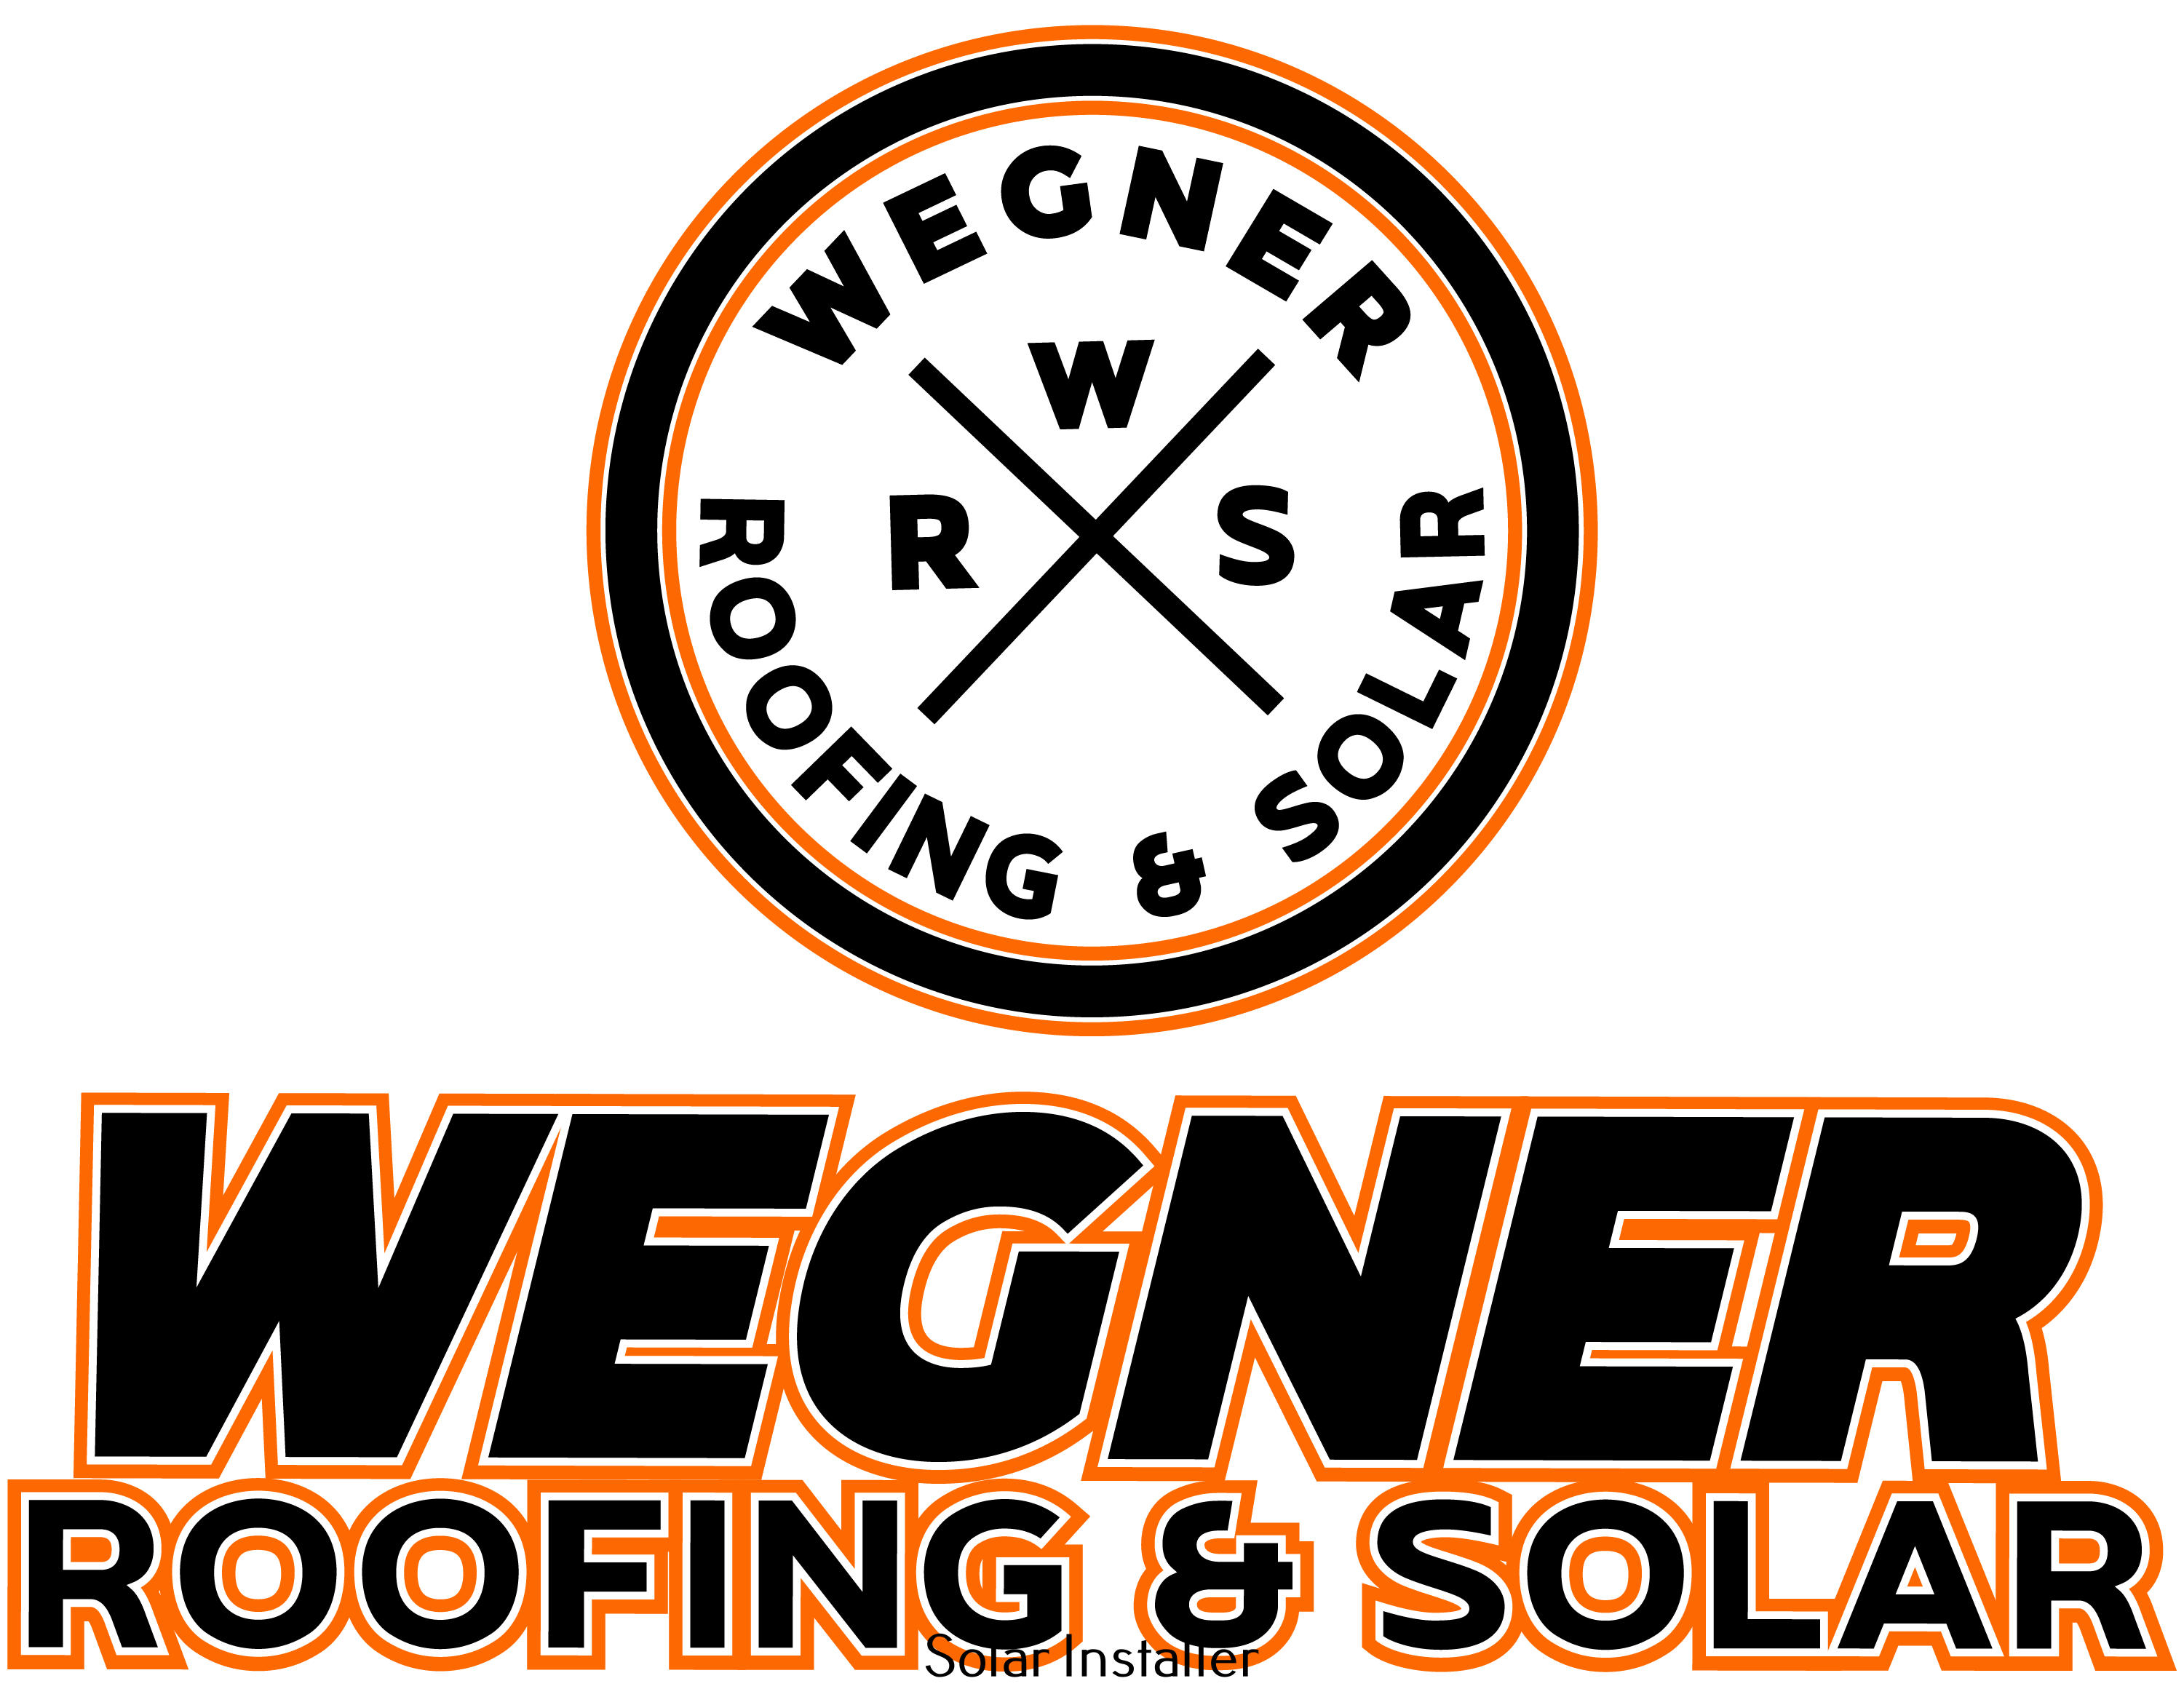 Wegner Roofing & Solar Outlines the Benefits of Solar-Powered Roofing Systems for Homeowners